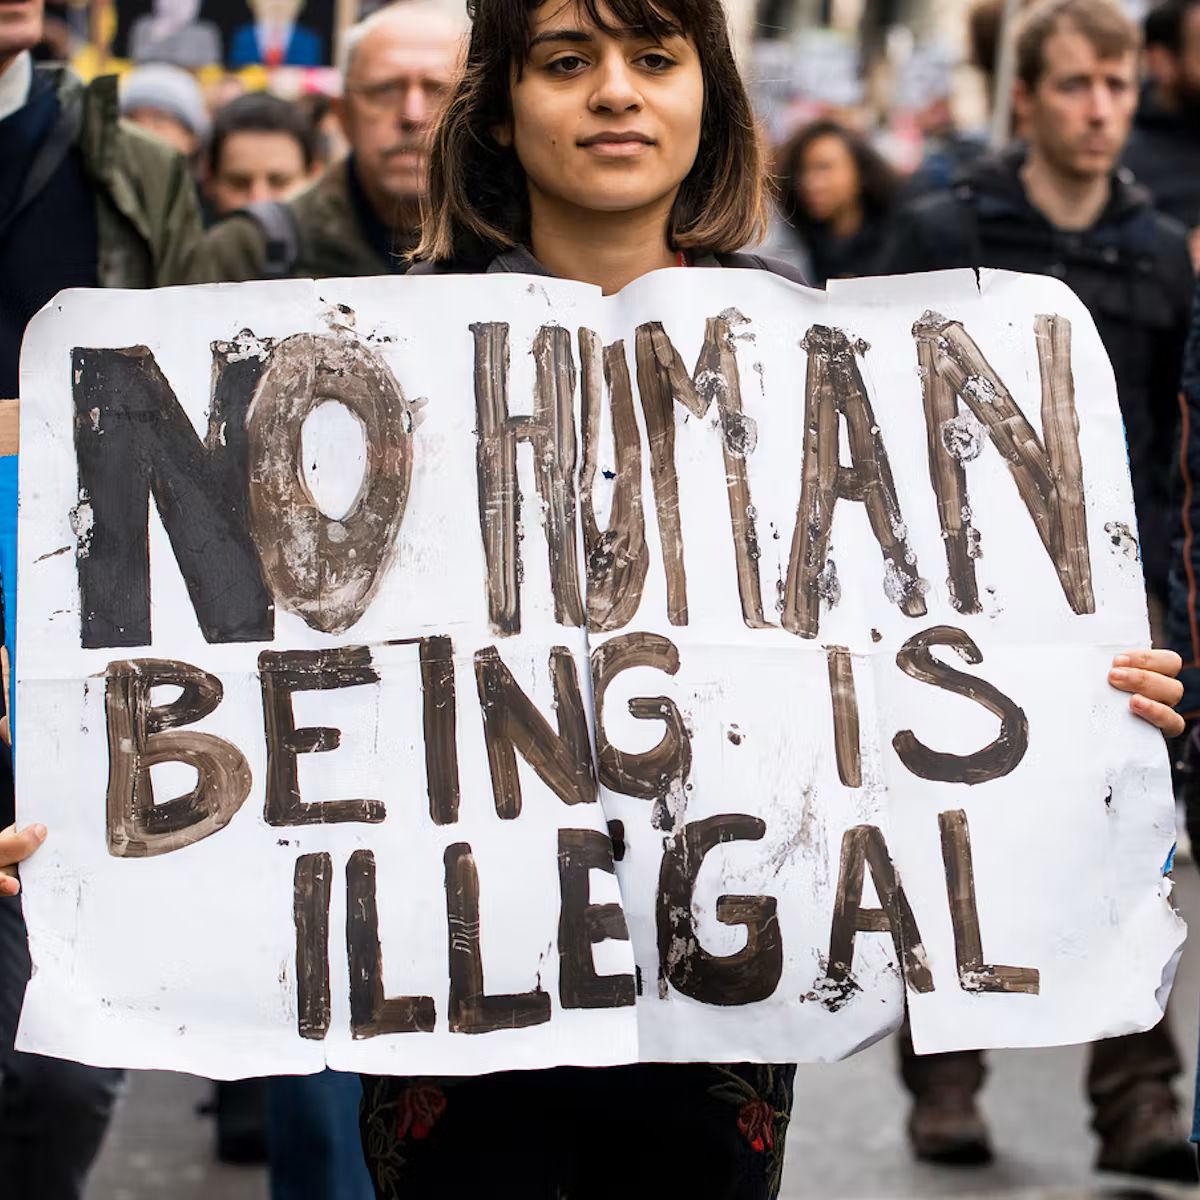 No Human is Illegal